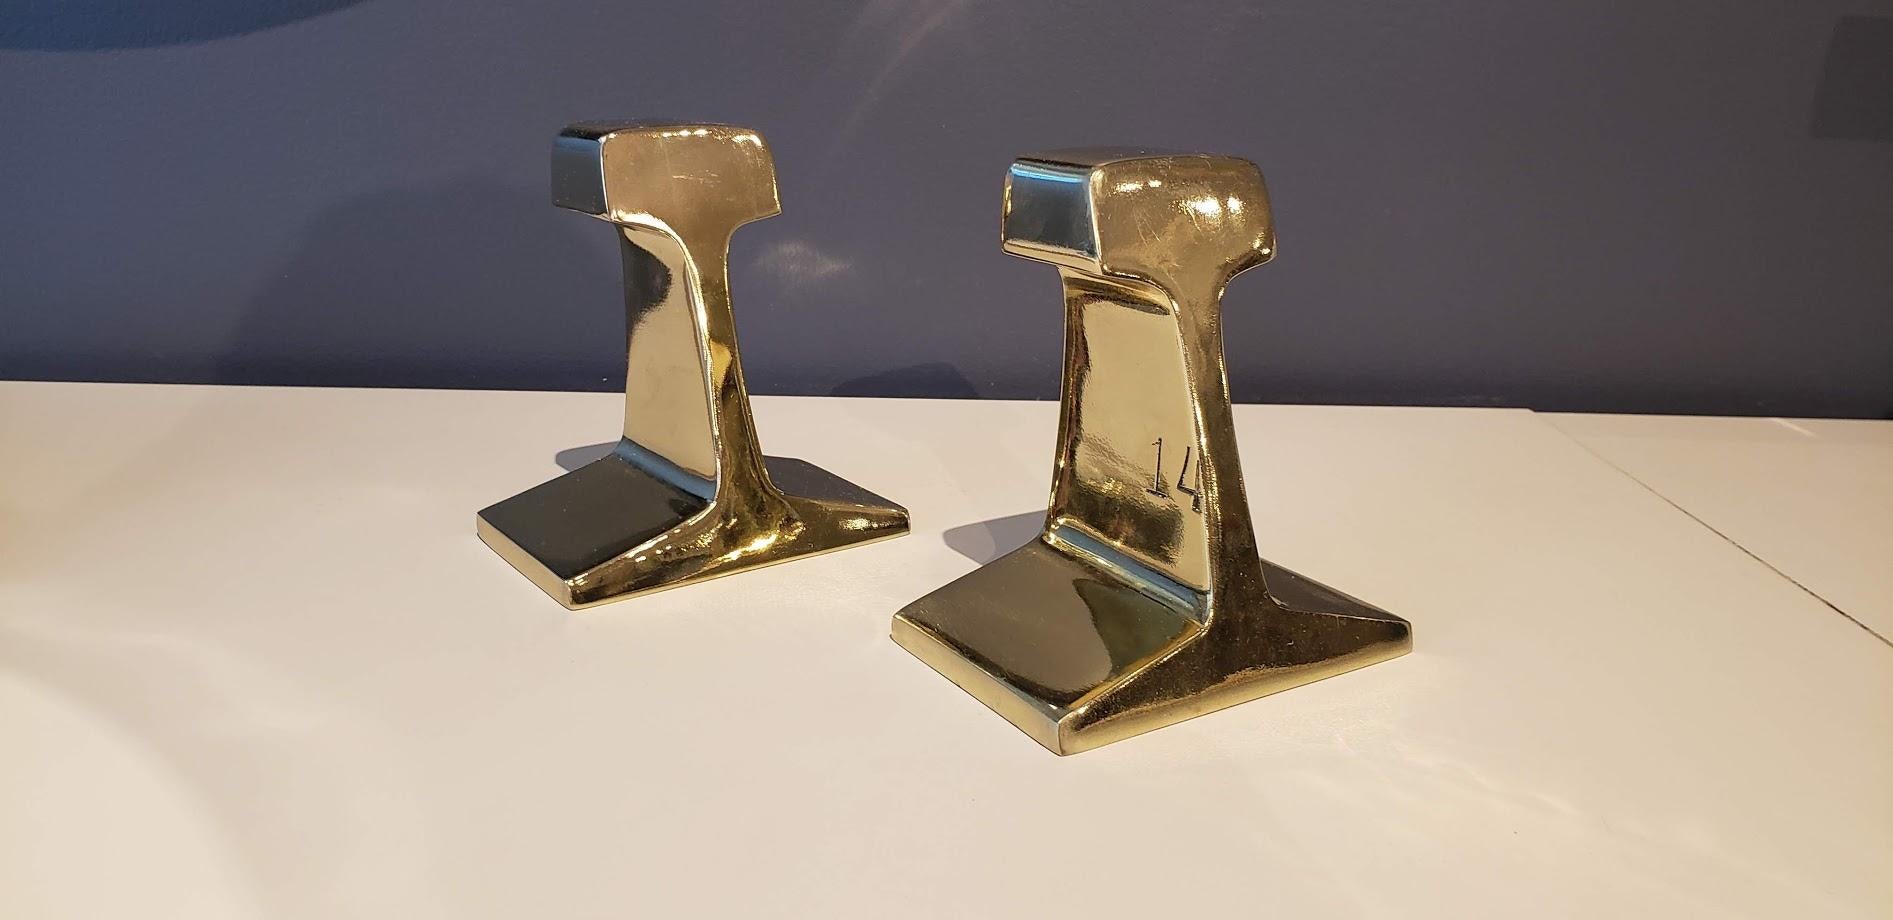 Stunning mirror-polished brass plated iron railroad tie bookends, circa 1970s. Very heavy. Excellent condition with very minor wear. These show beautifully and are quite large--great statement pieces!

6